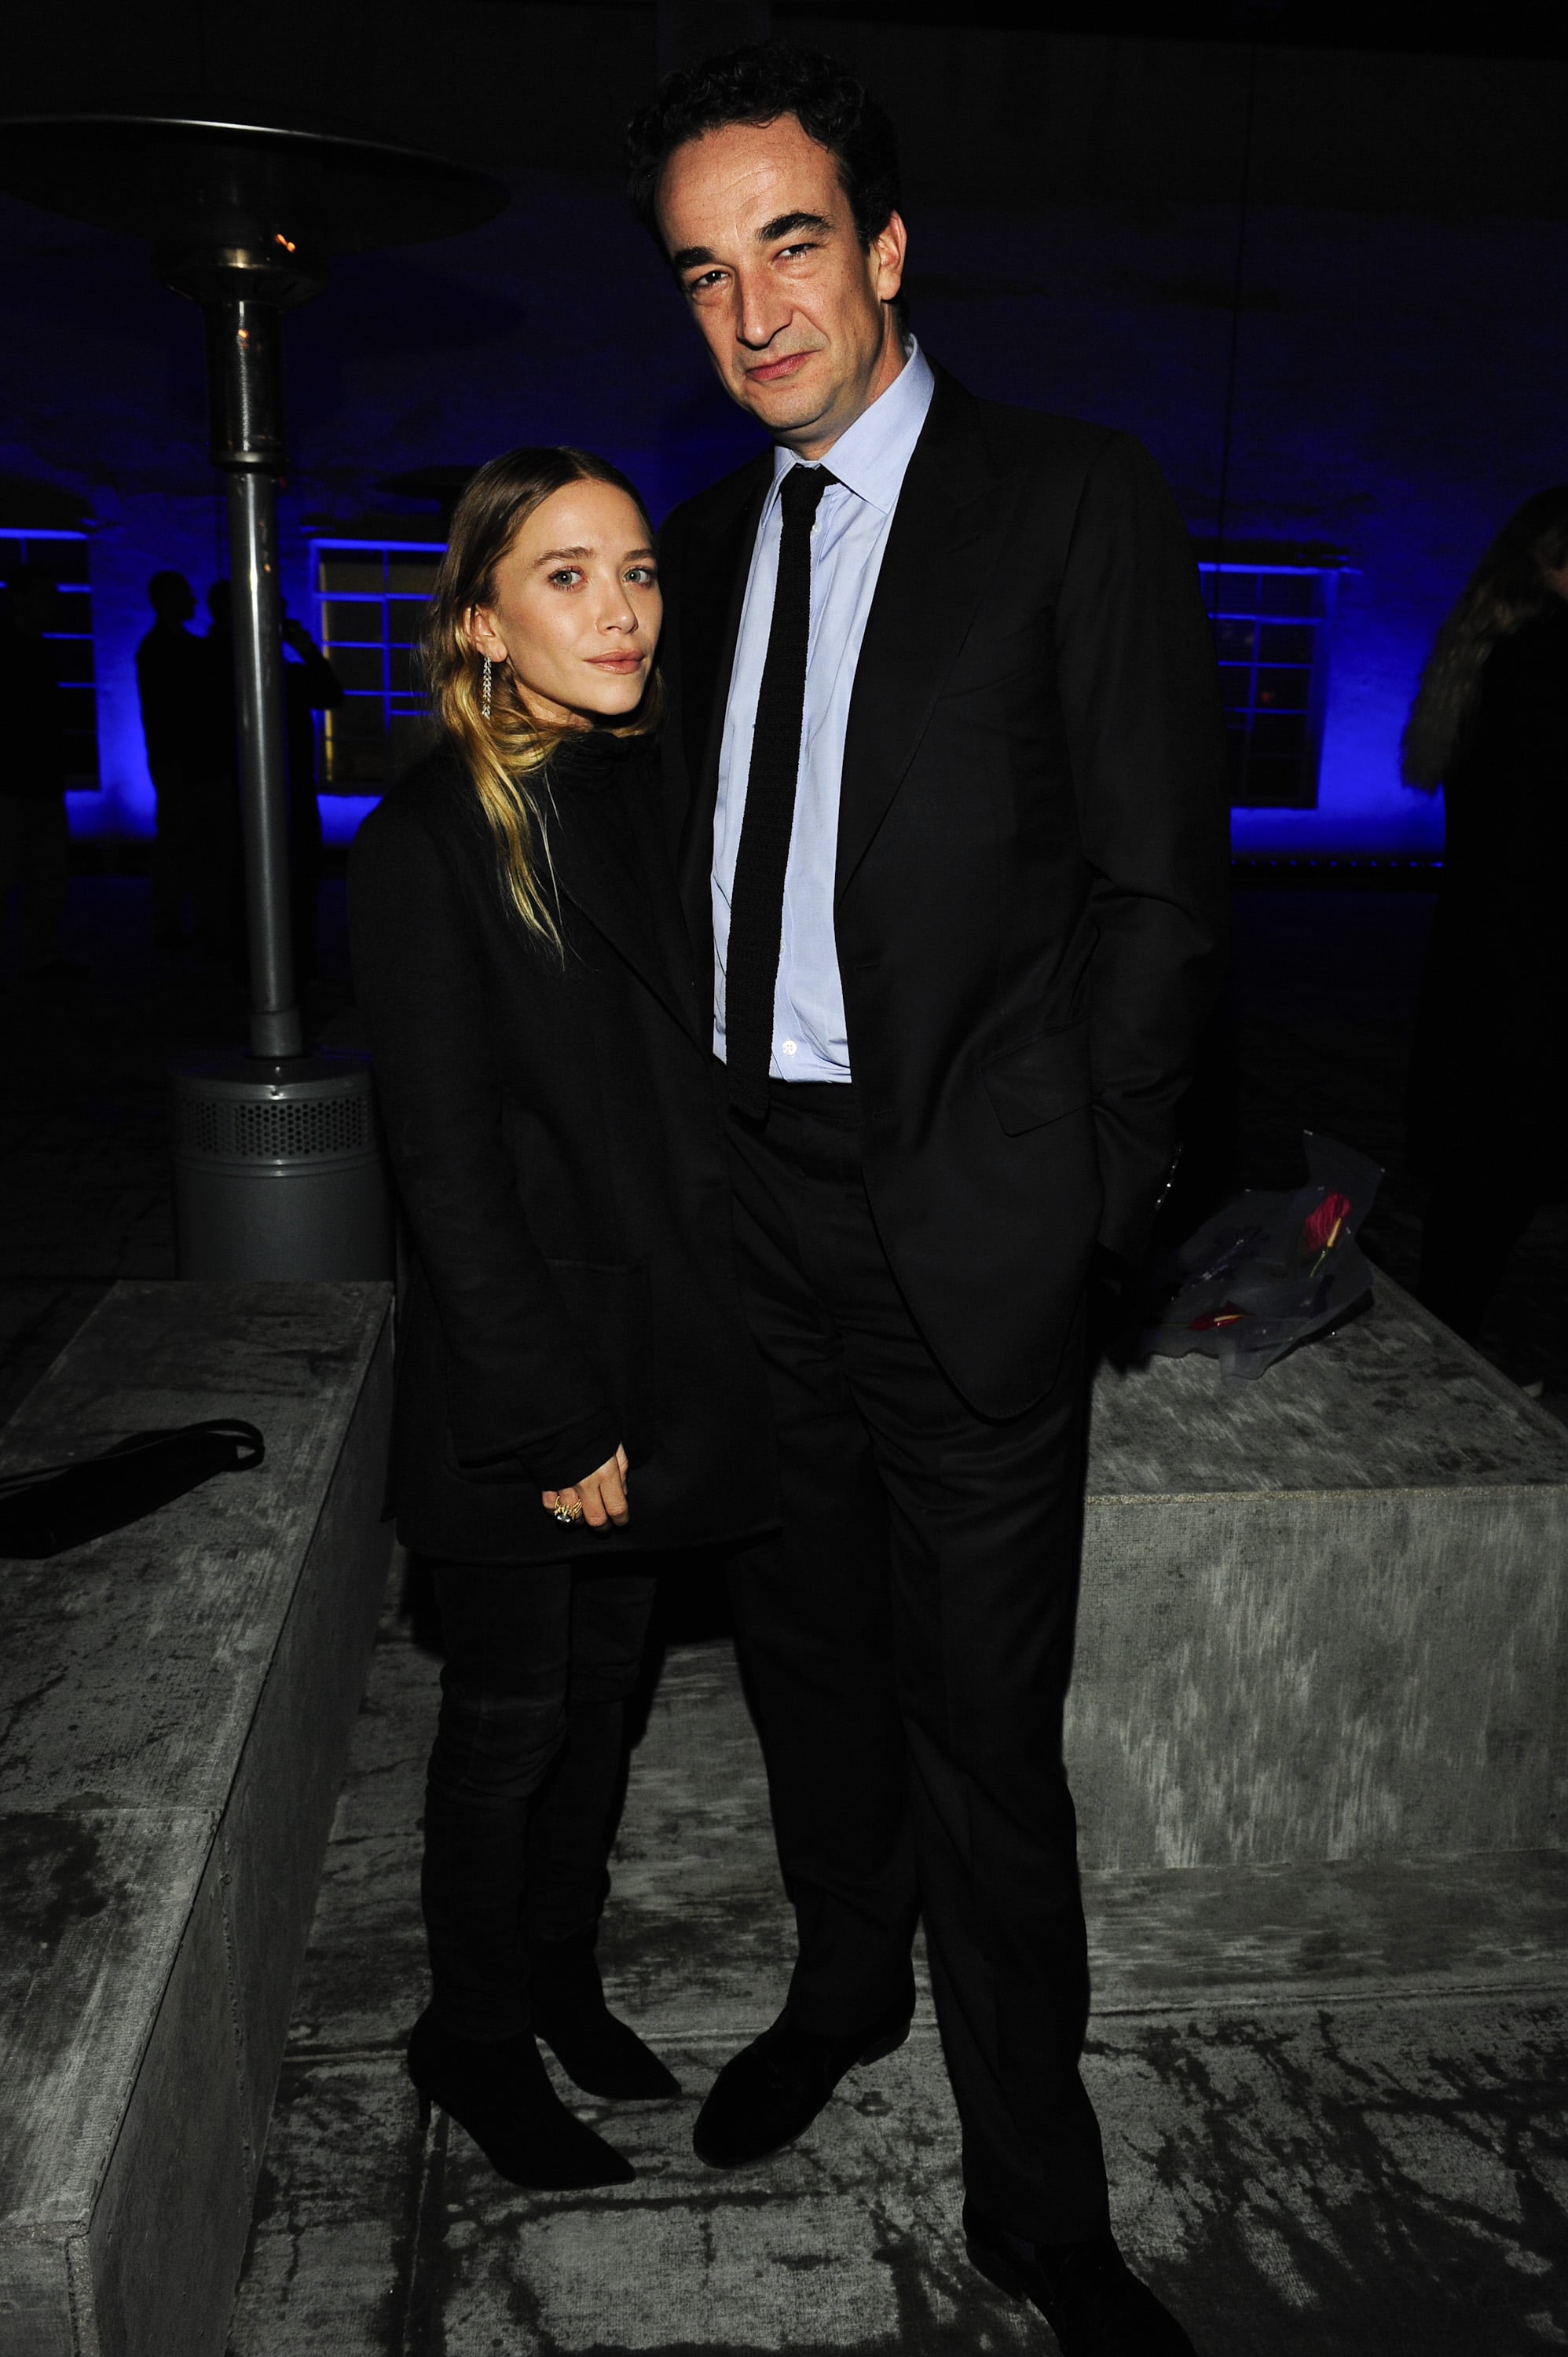 LOS ANGELES, CA - DECEMBER 5:  Mary-Kate Olsen, Olivier Sarkozy attend the Just One Eye Launch of the Utilitarian Backpack Event at Just One Eye on December 5, 2014 in Hollywood, California.  (Photo by Amy Graves/WireImage)